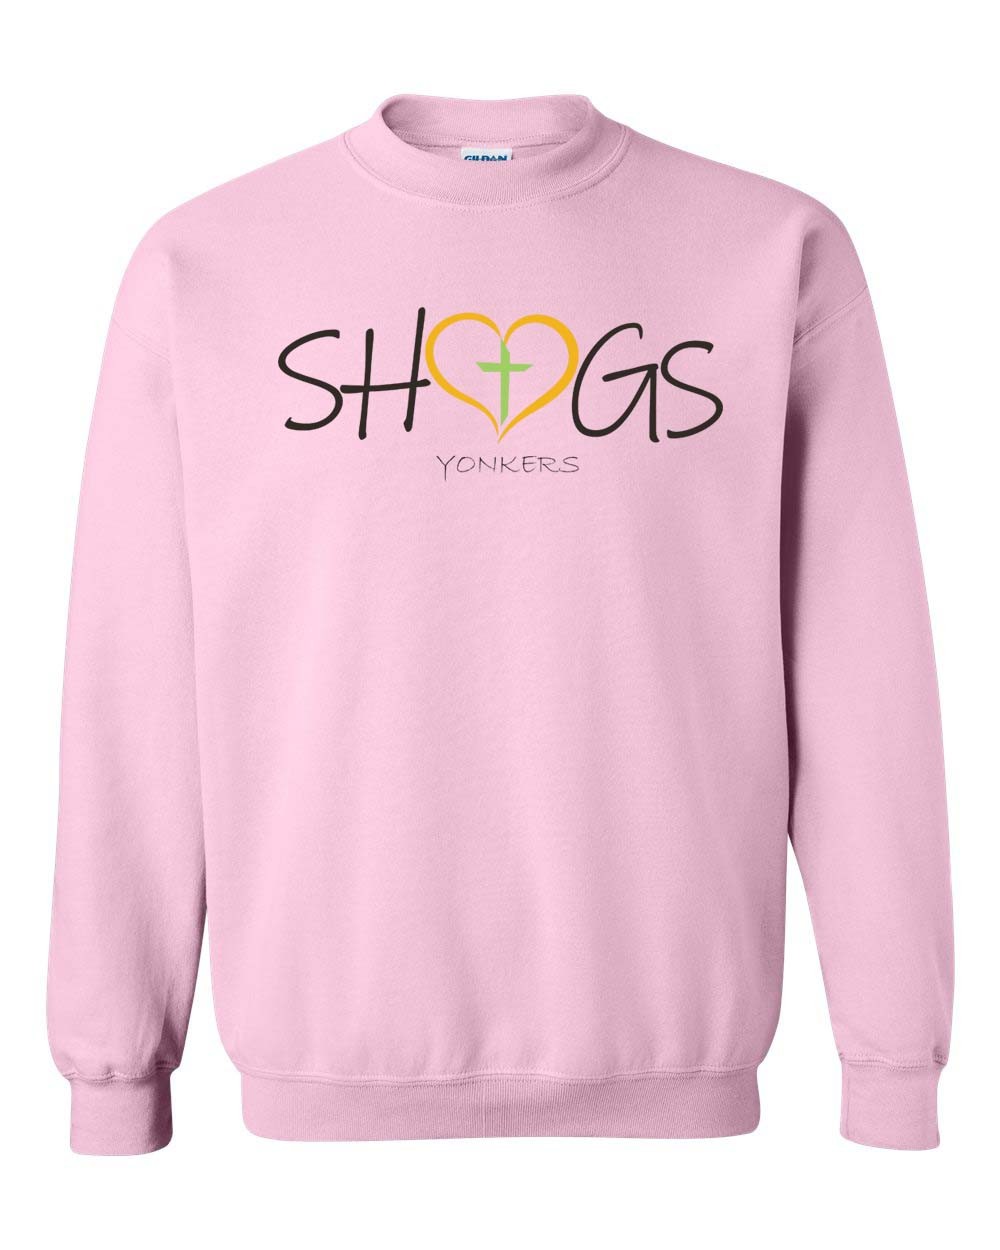 STAFF SHGS Sweatshirt w/ Heart Logo ADULT ONLY - Please Allow 2-3 Weeks for Delivery